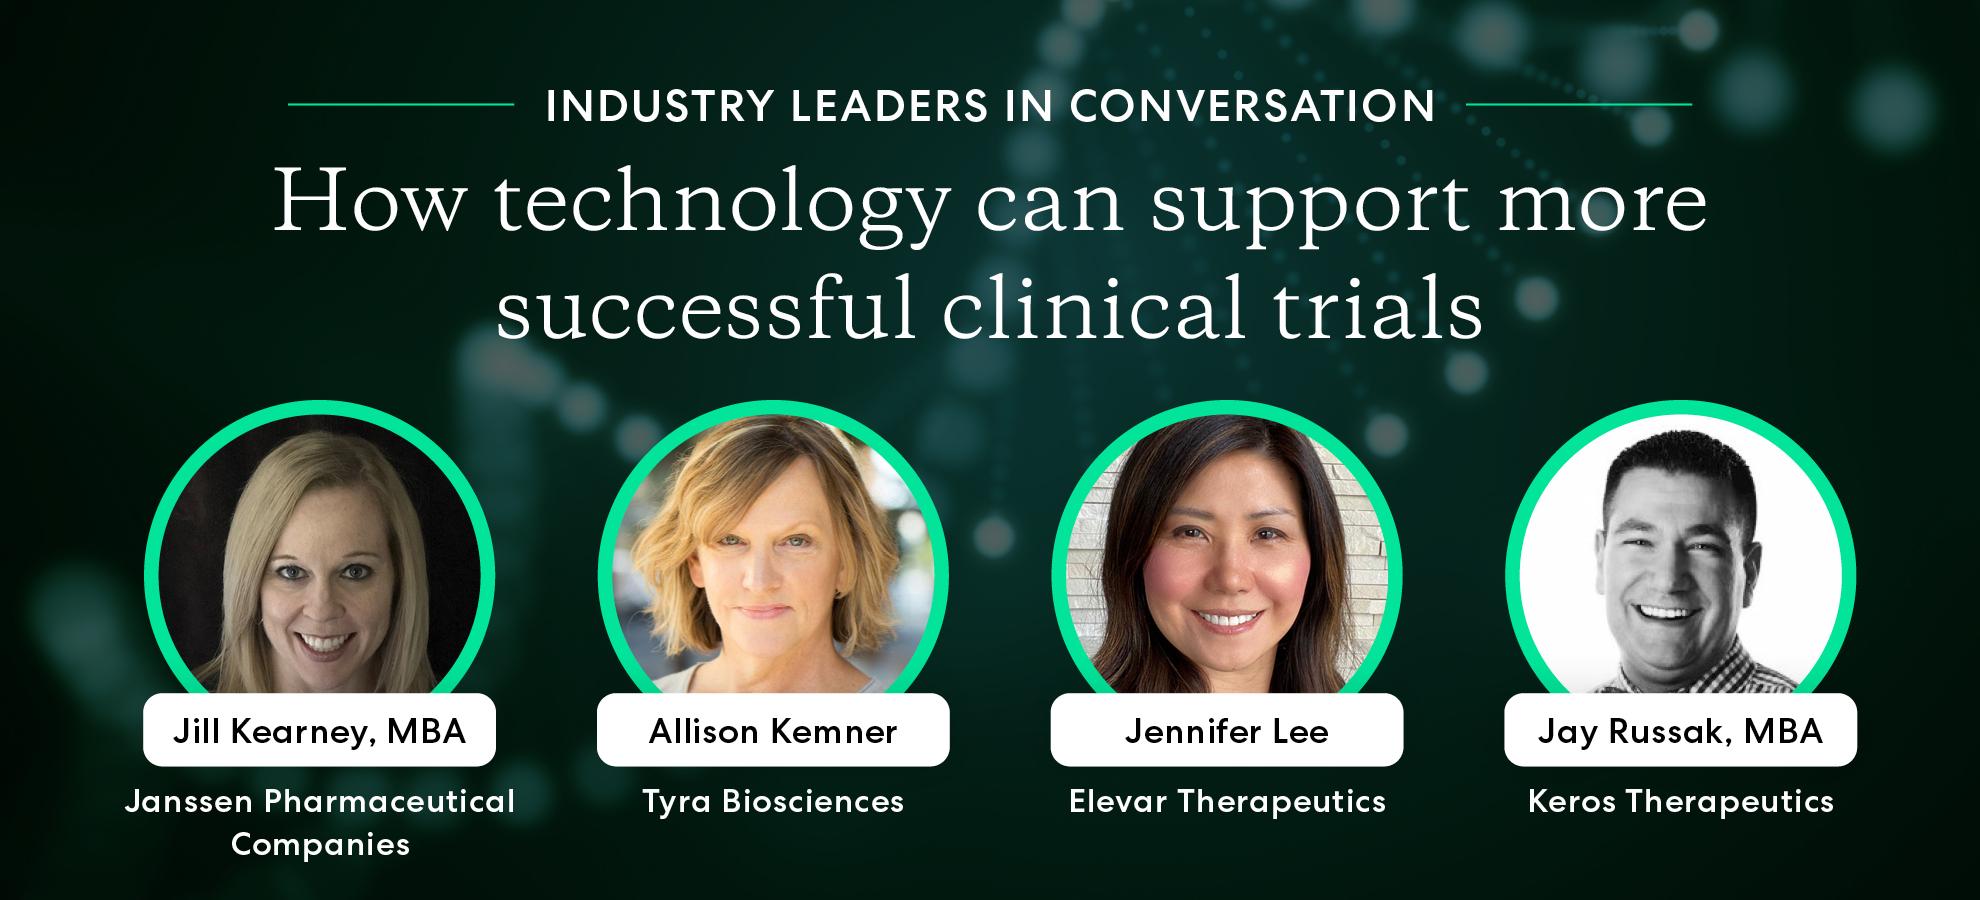 Industry leaders in conversation: how technology supports successful trials